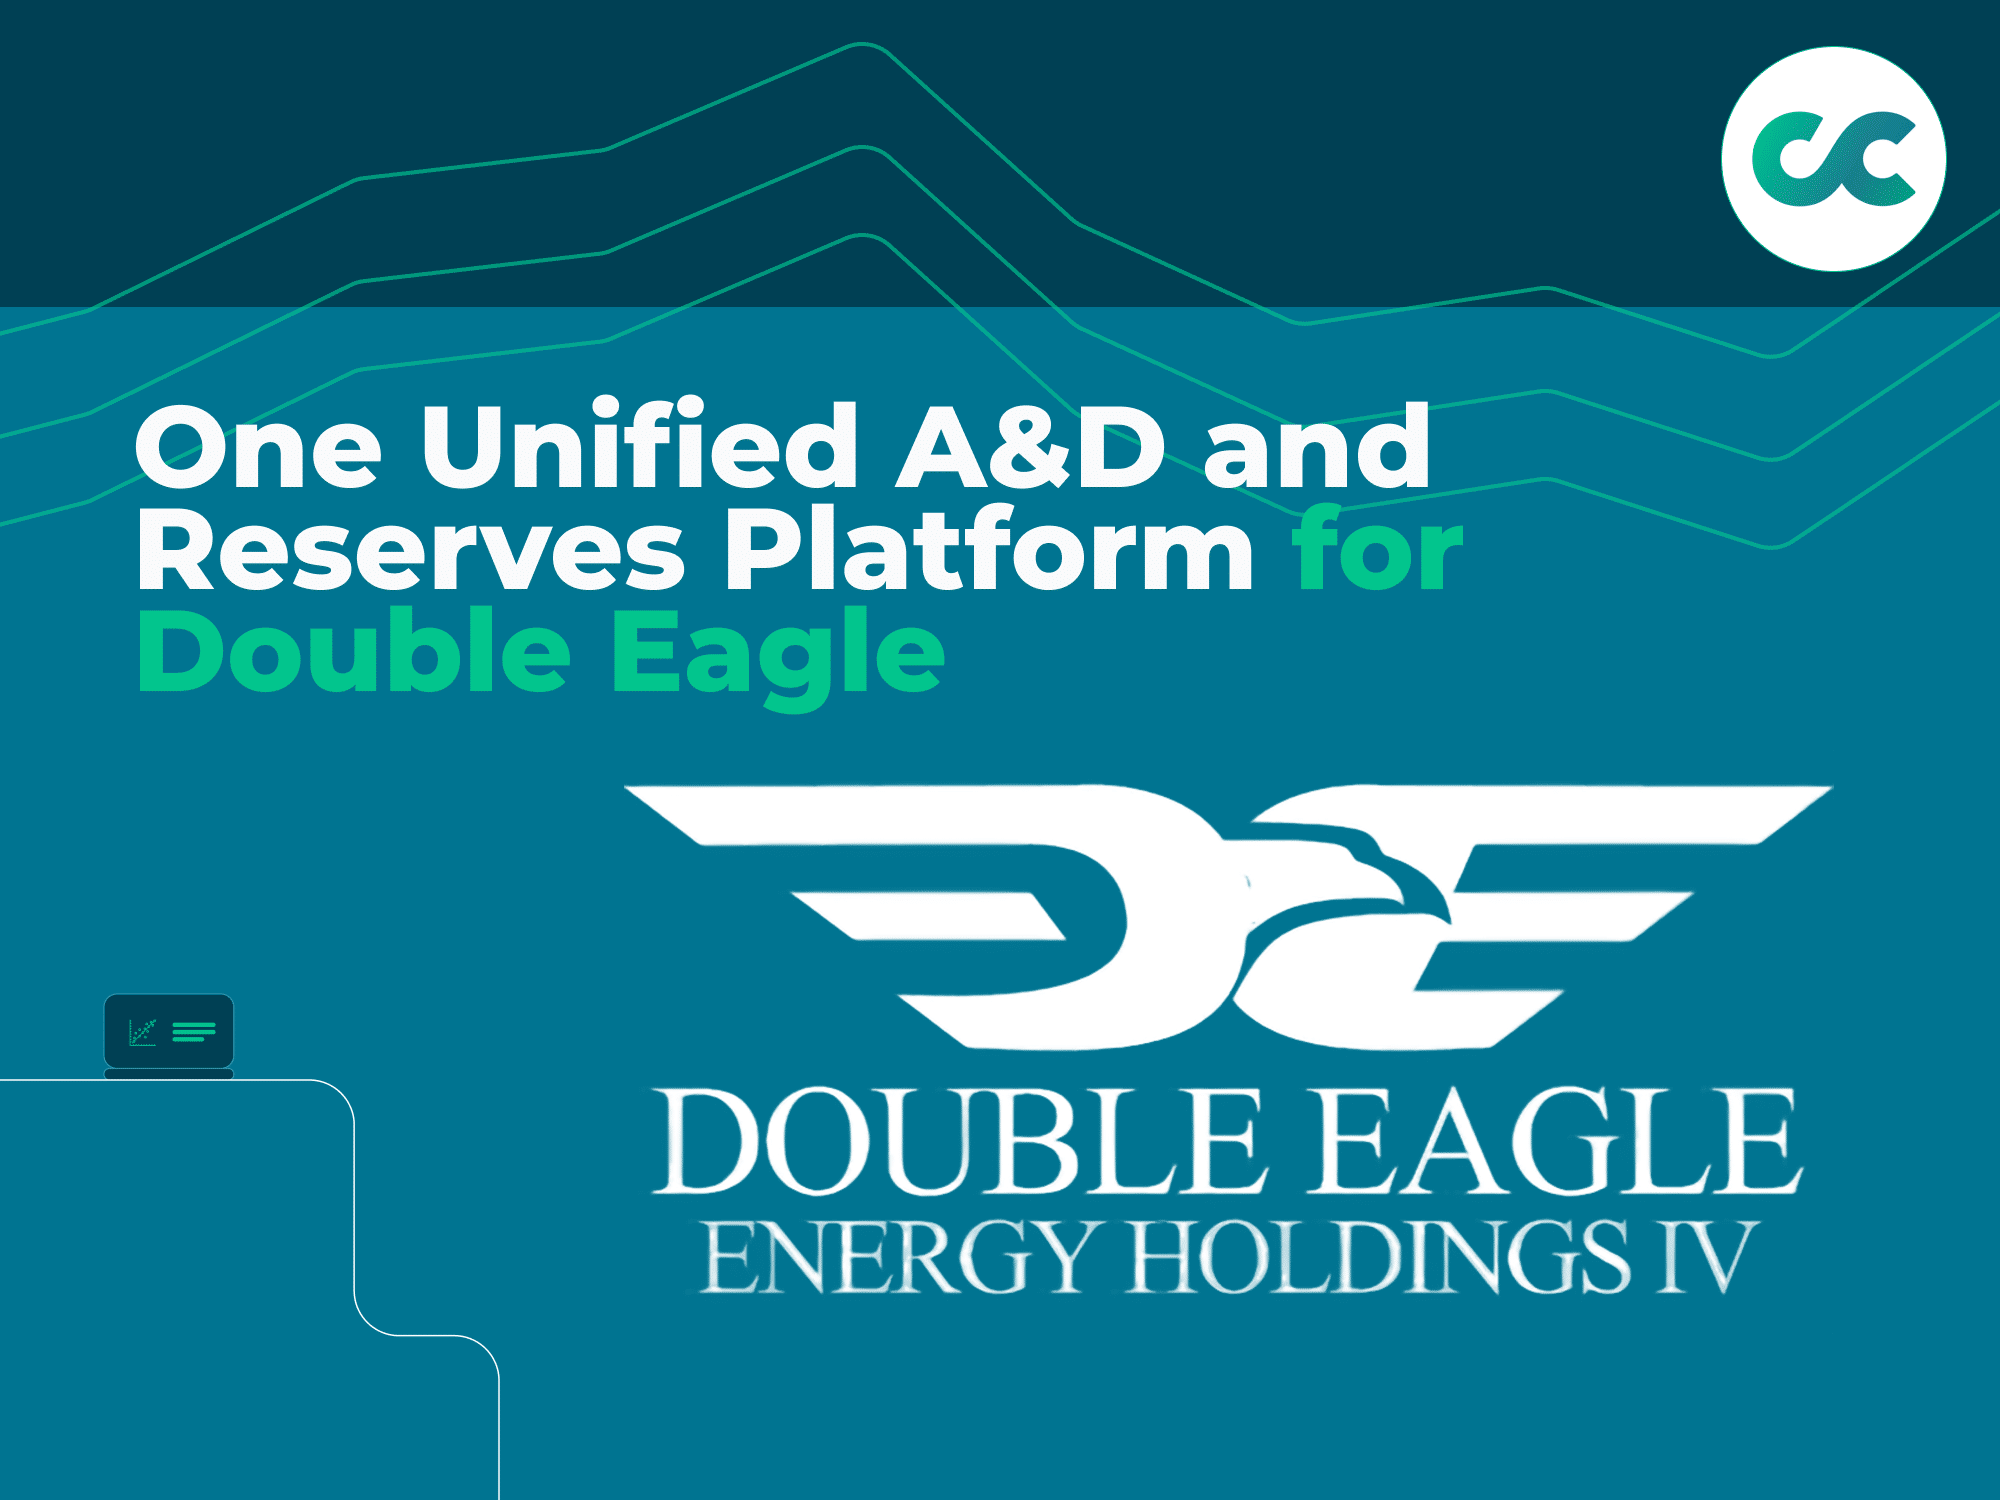 One Unified A&D and Reserves Platform for Double Eagle